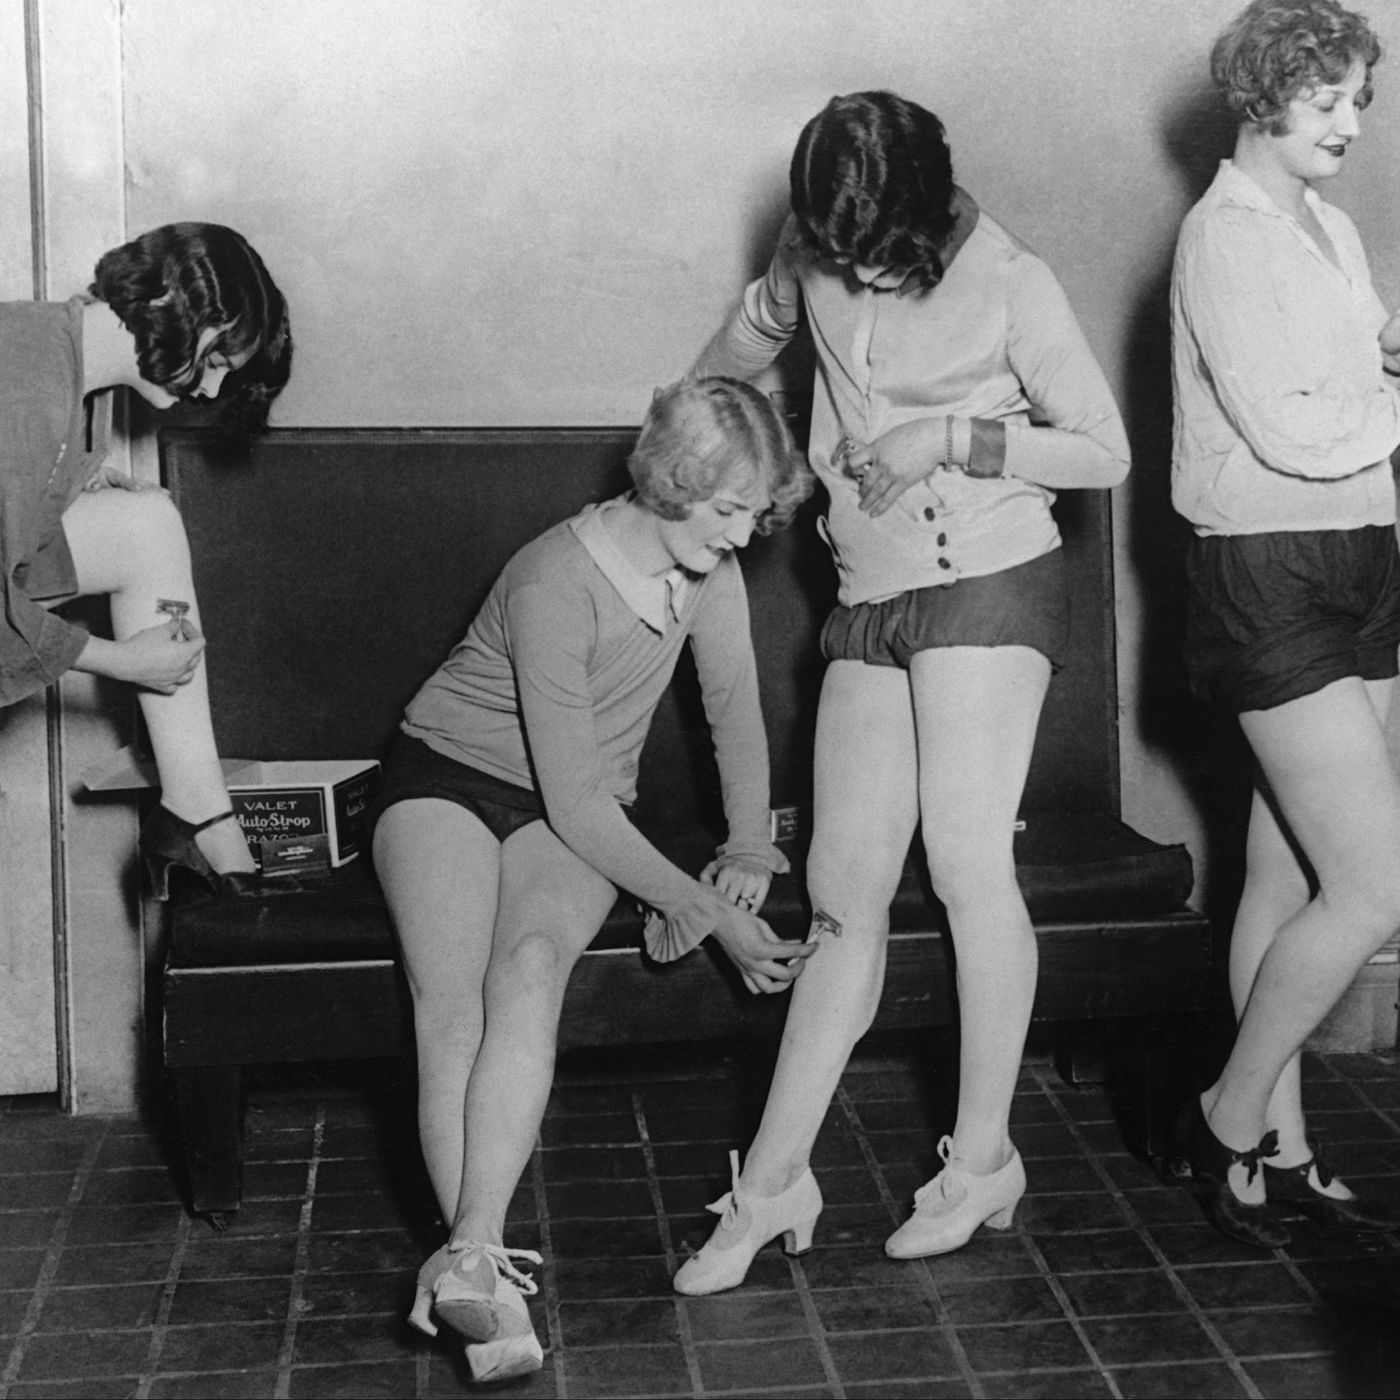 How the beauty industry convinced women to shave their legs - Vox